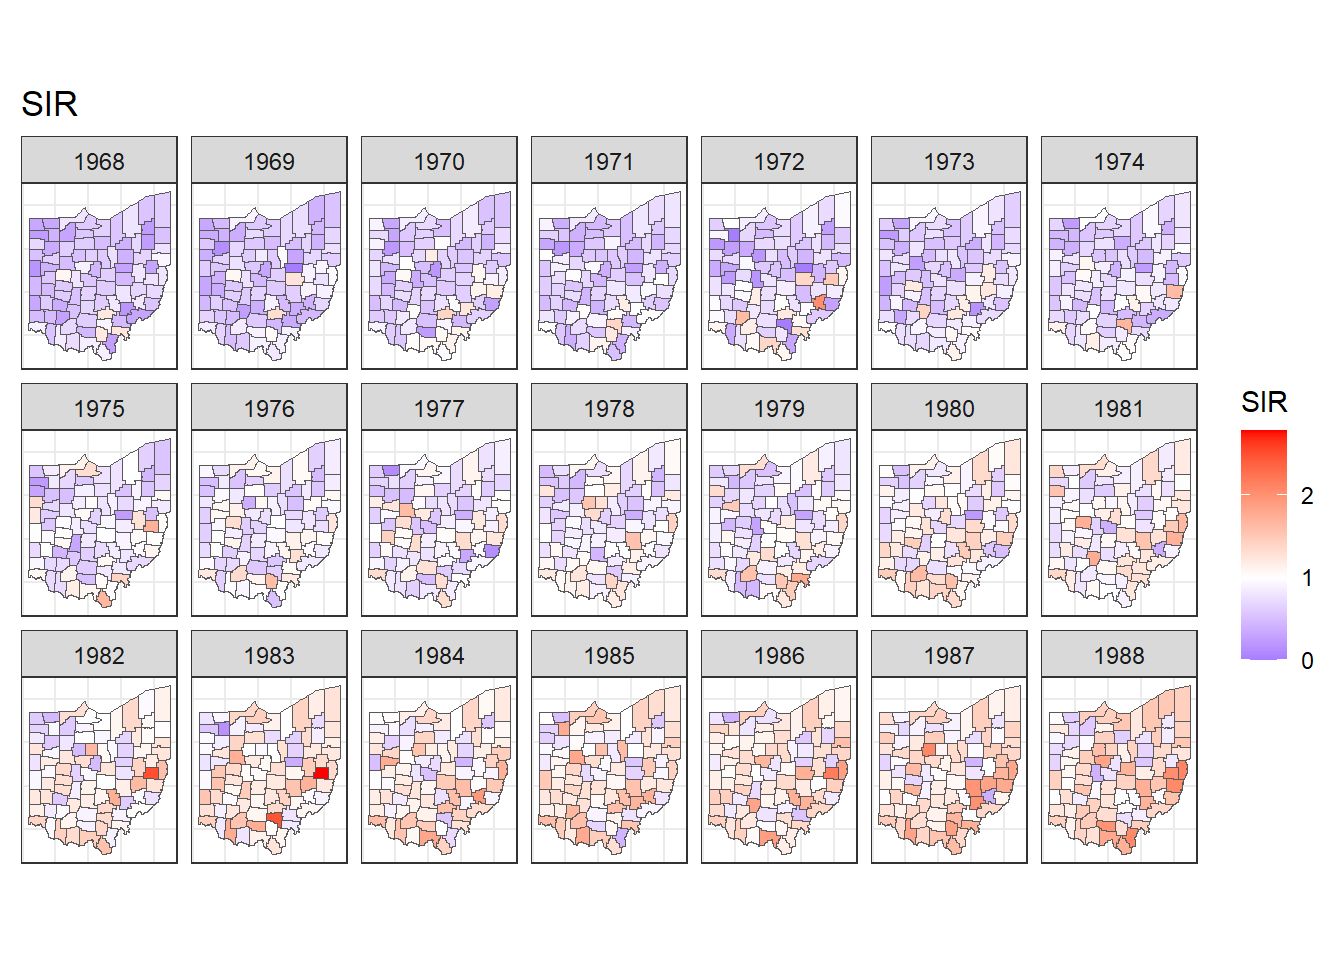 Maps of lung cancer SIR in Ohio counties from 1968 to 1988 created with a diverging color scale.